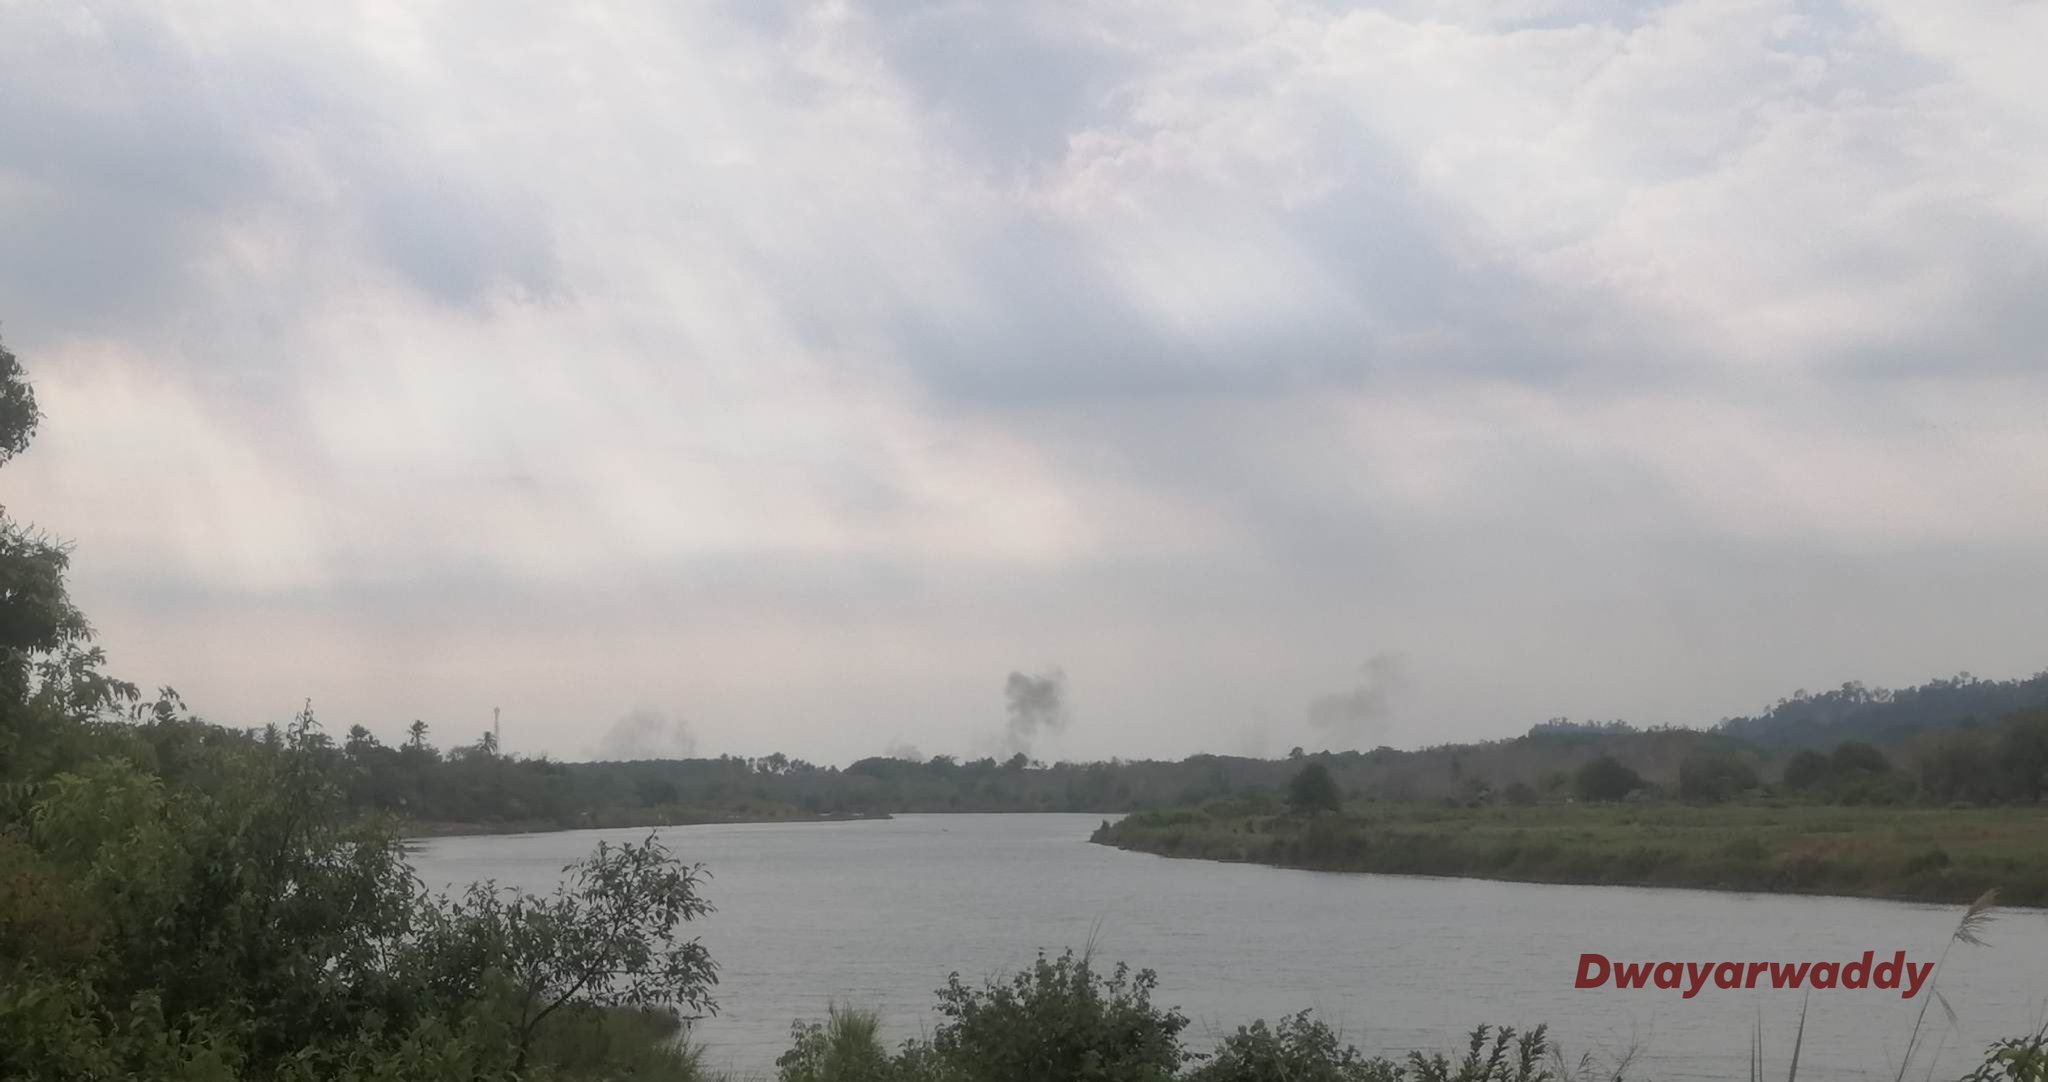 Fighting in Shwe Hlay, Thandwe Township, seen from a distance. (Photo: Dwayarwaddy)